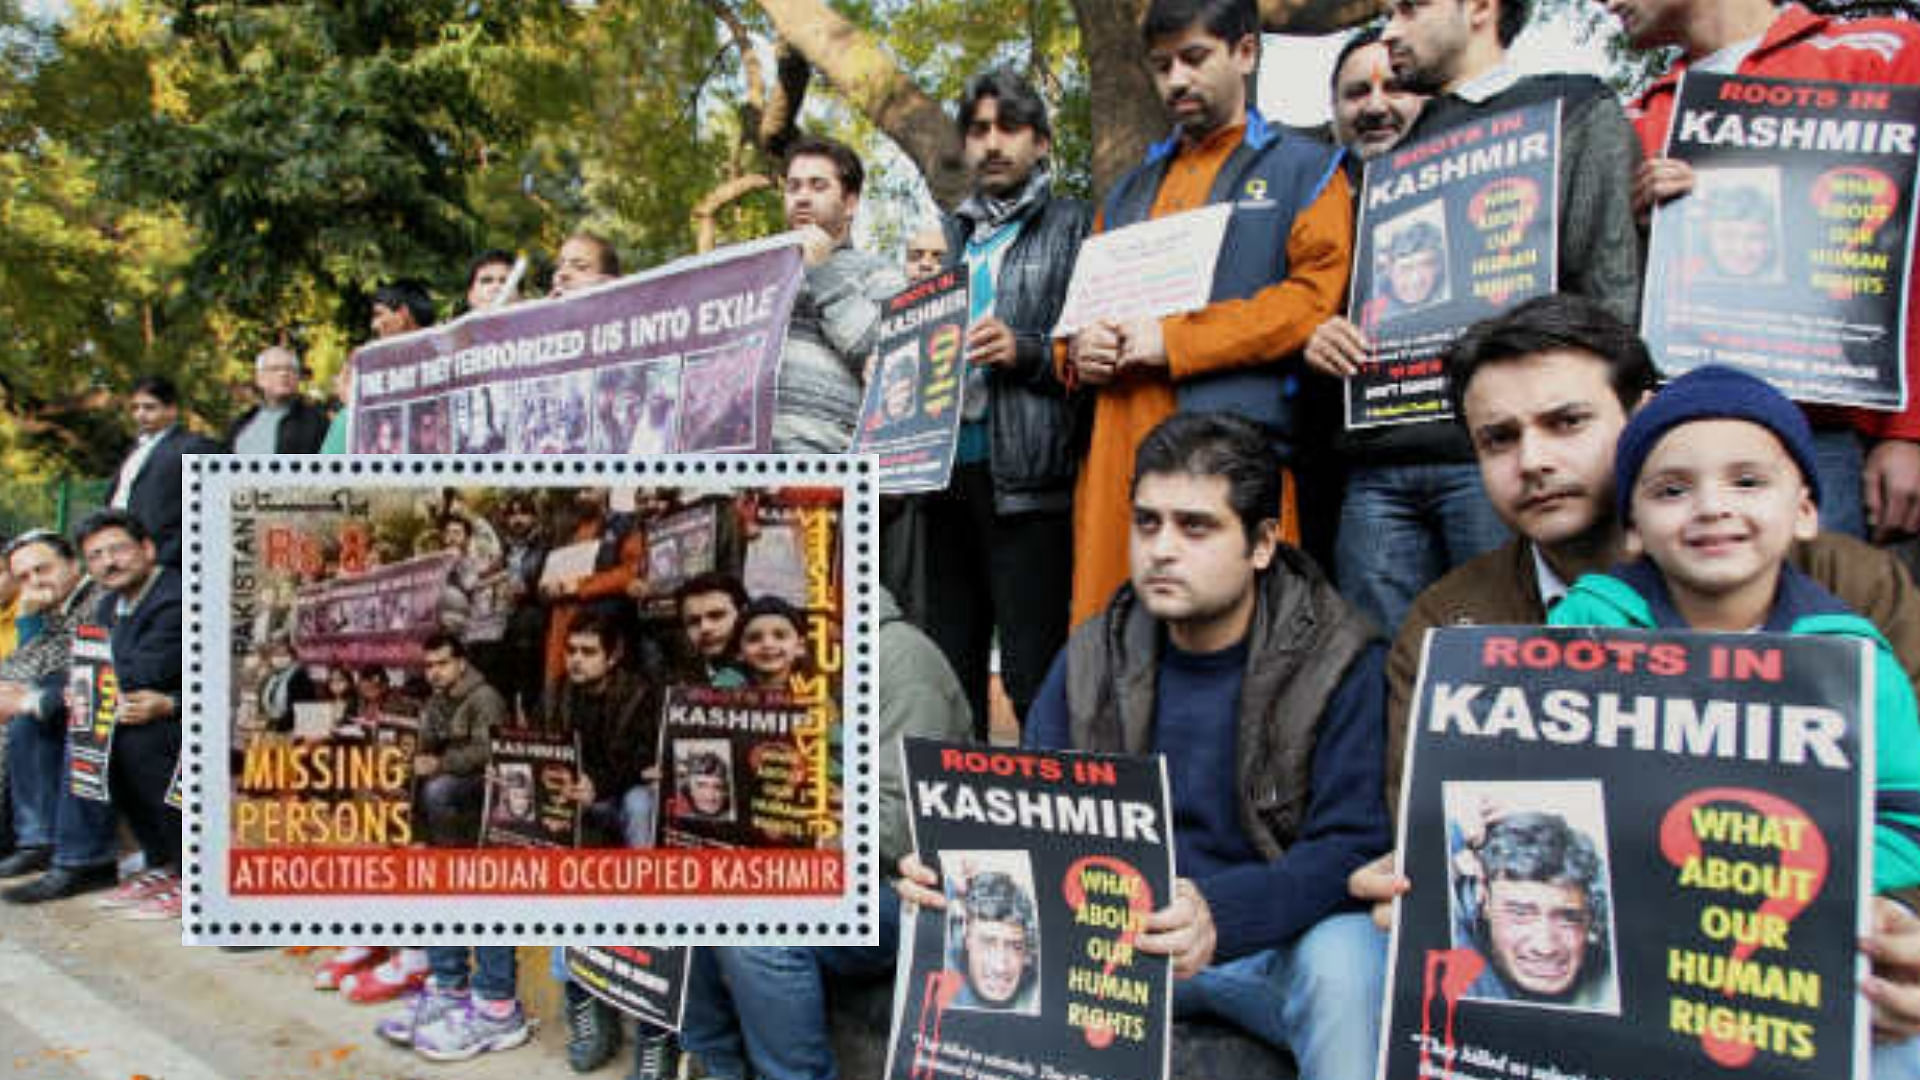 The picture in the stamp is from a protest organised by a Kashmiri Pandit group called  ‘Roots in Kashmir’. 